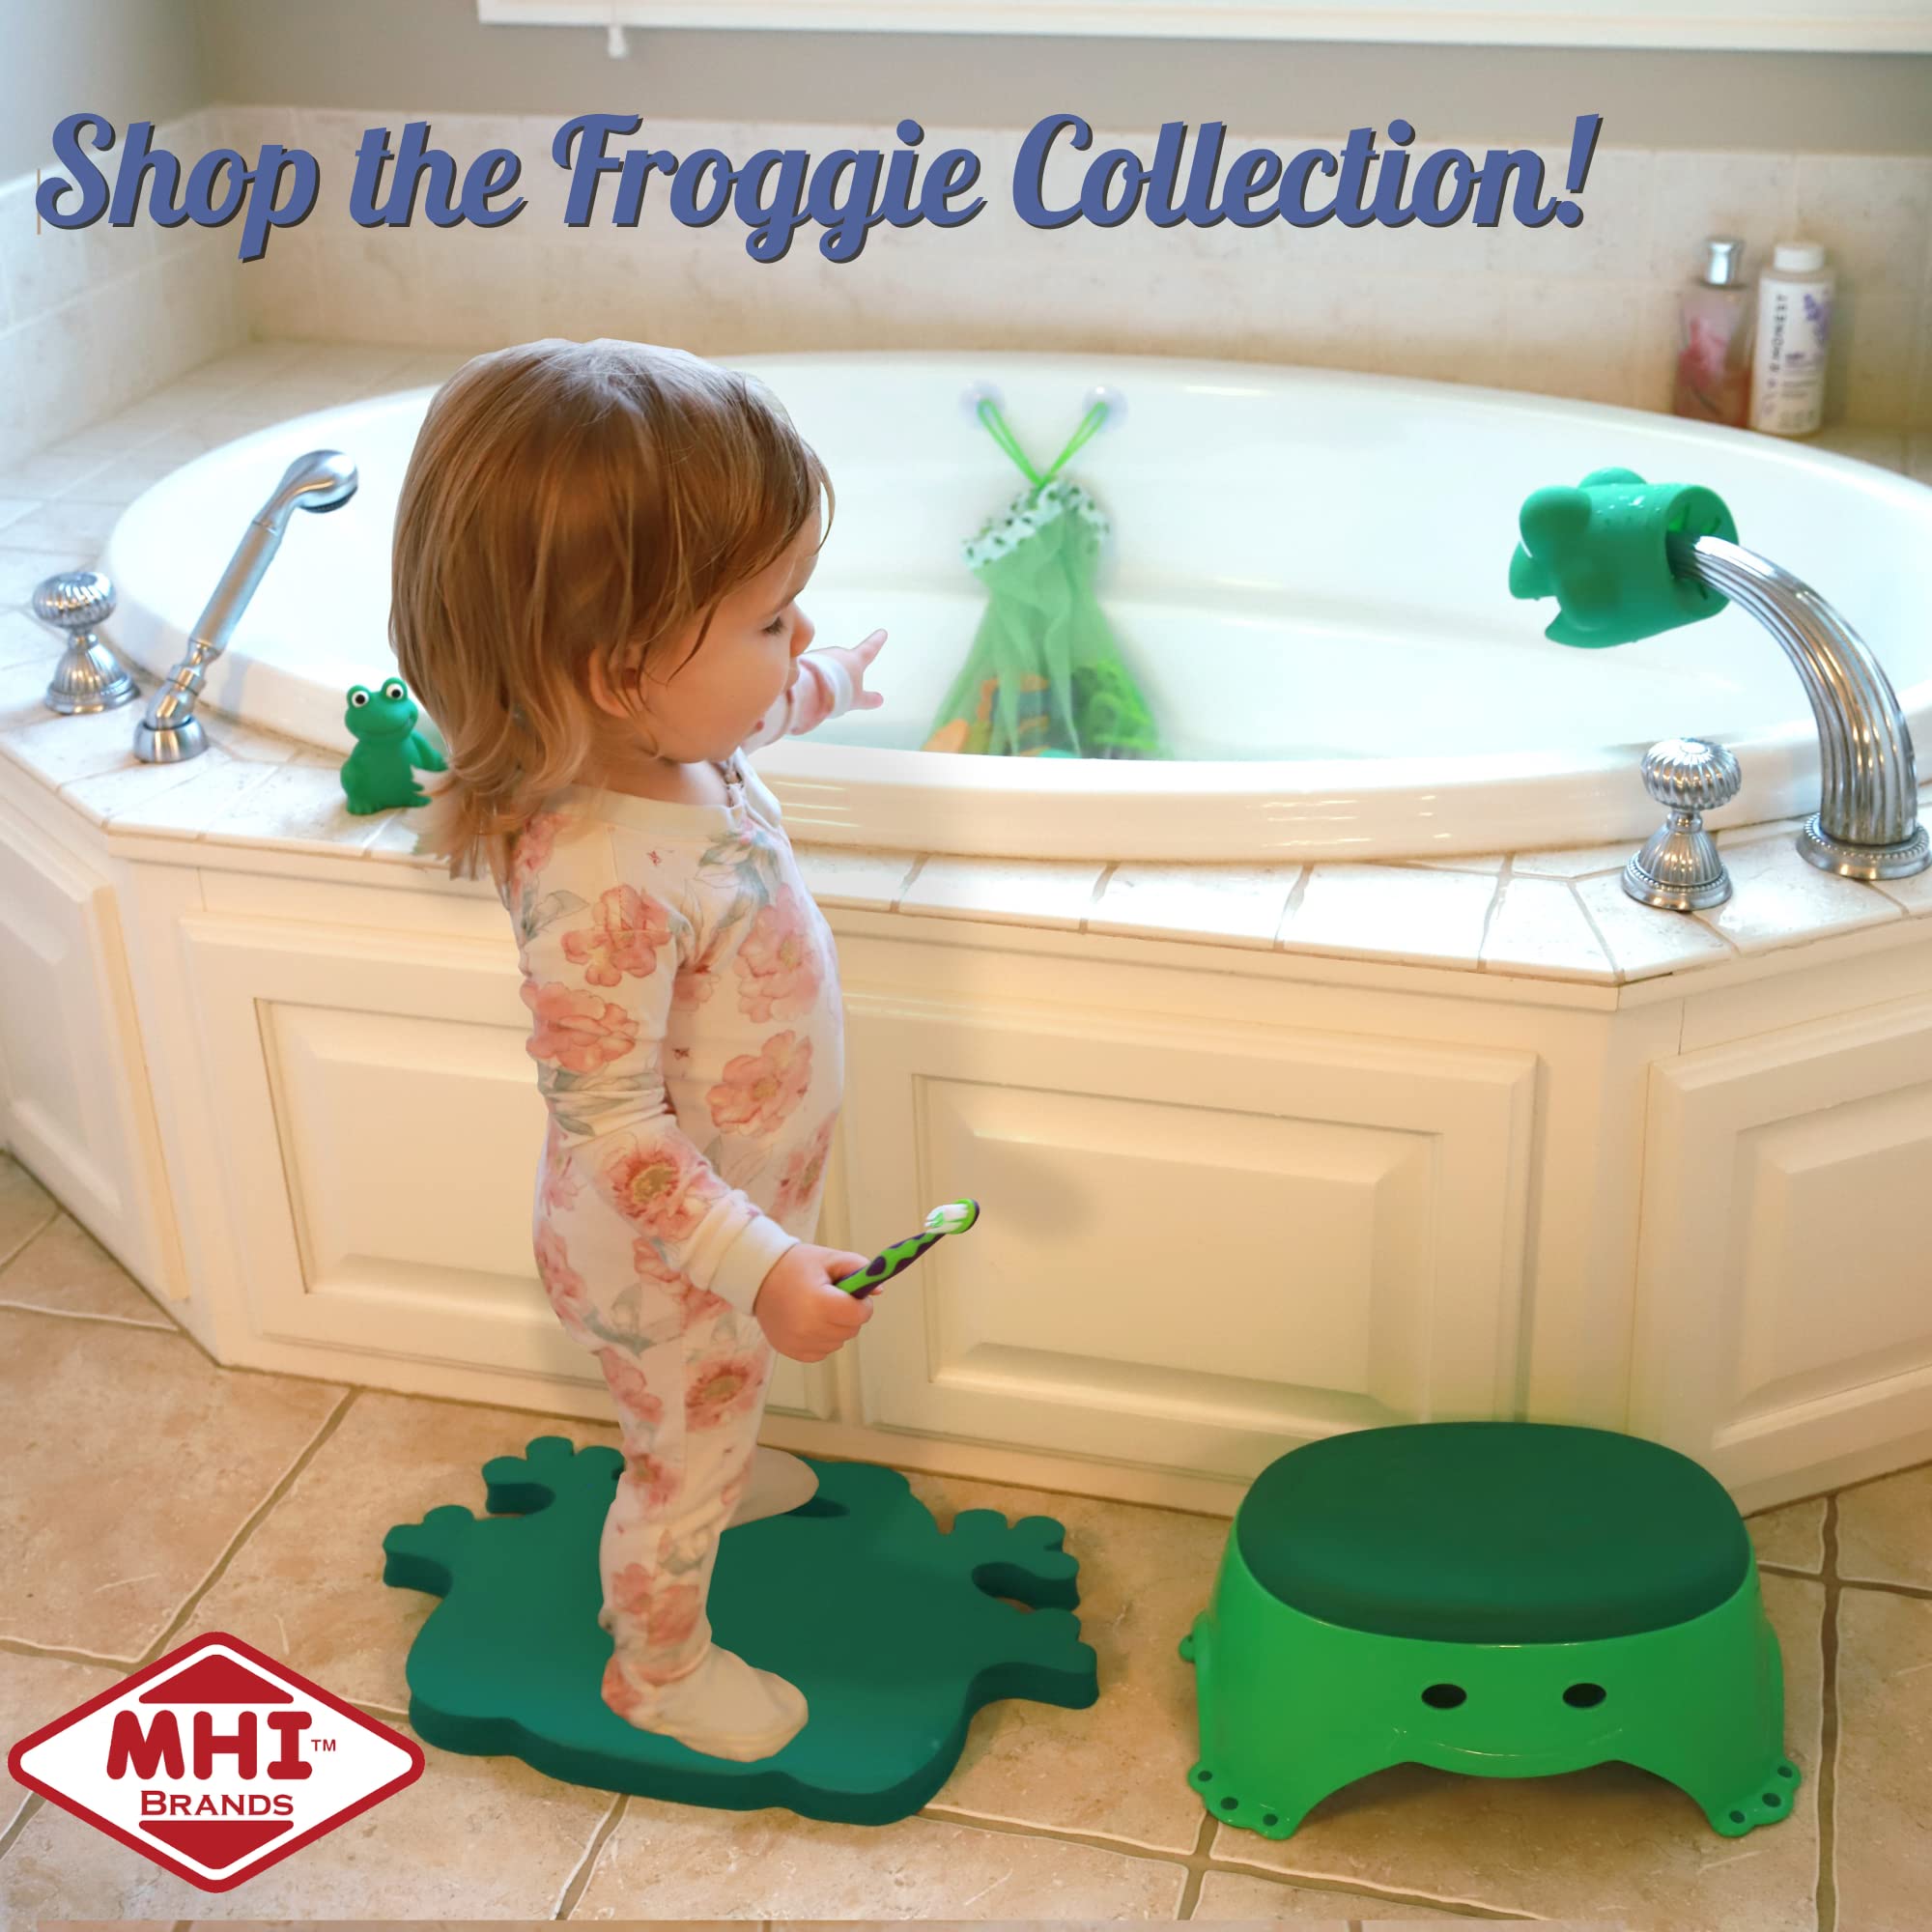 Mommy's Helper Faucet Cover Froggie Collection, Green, 6-48 Months